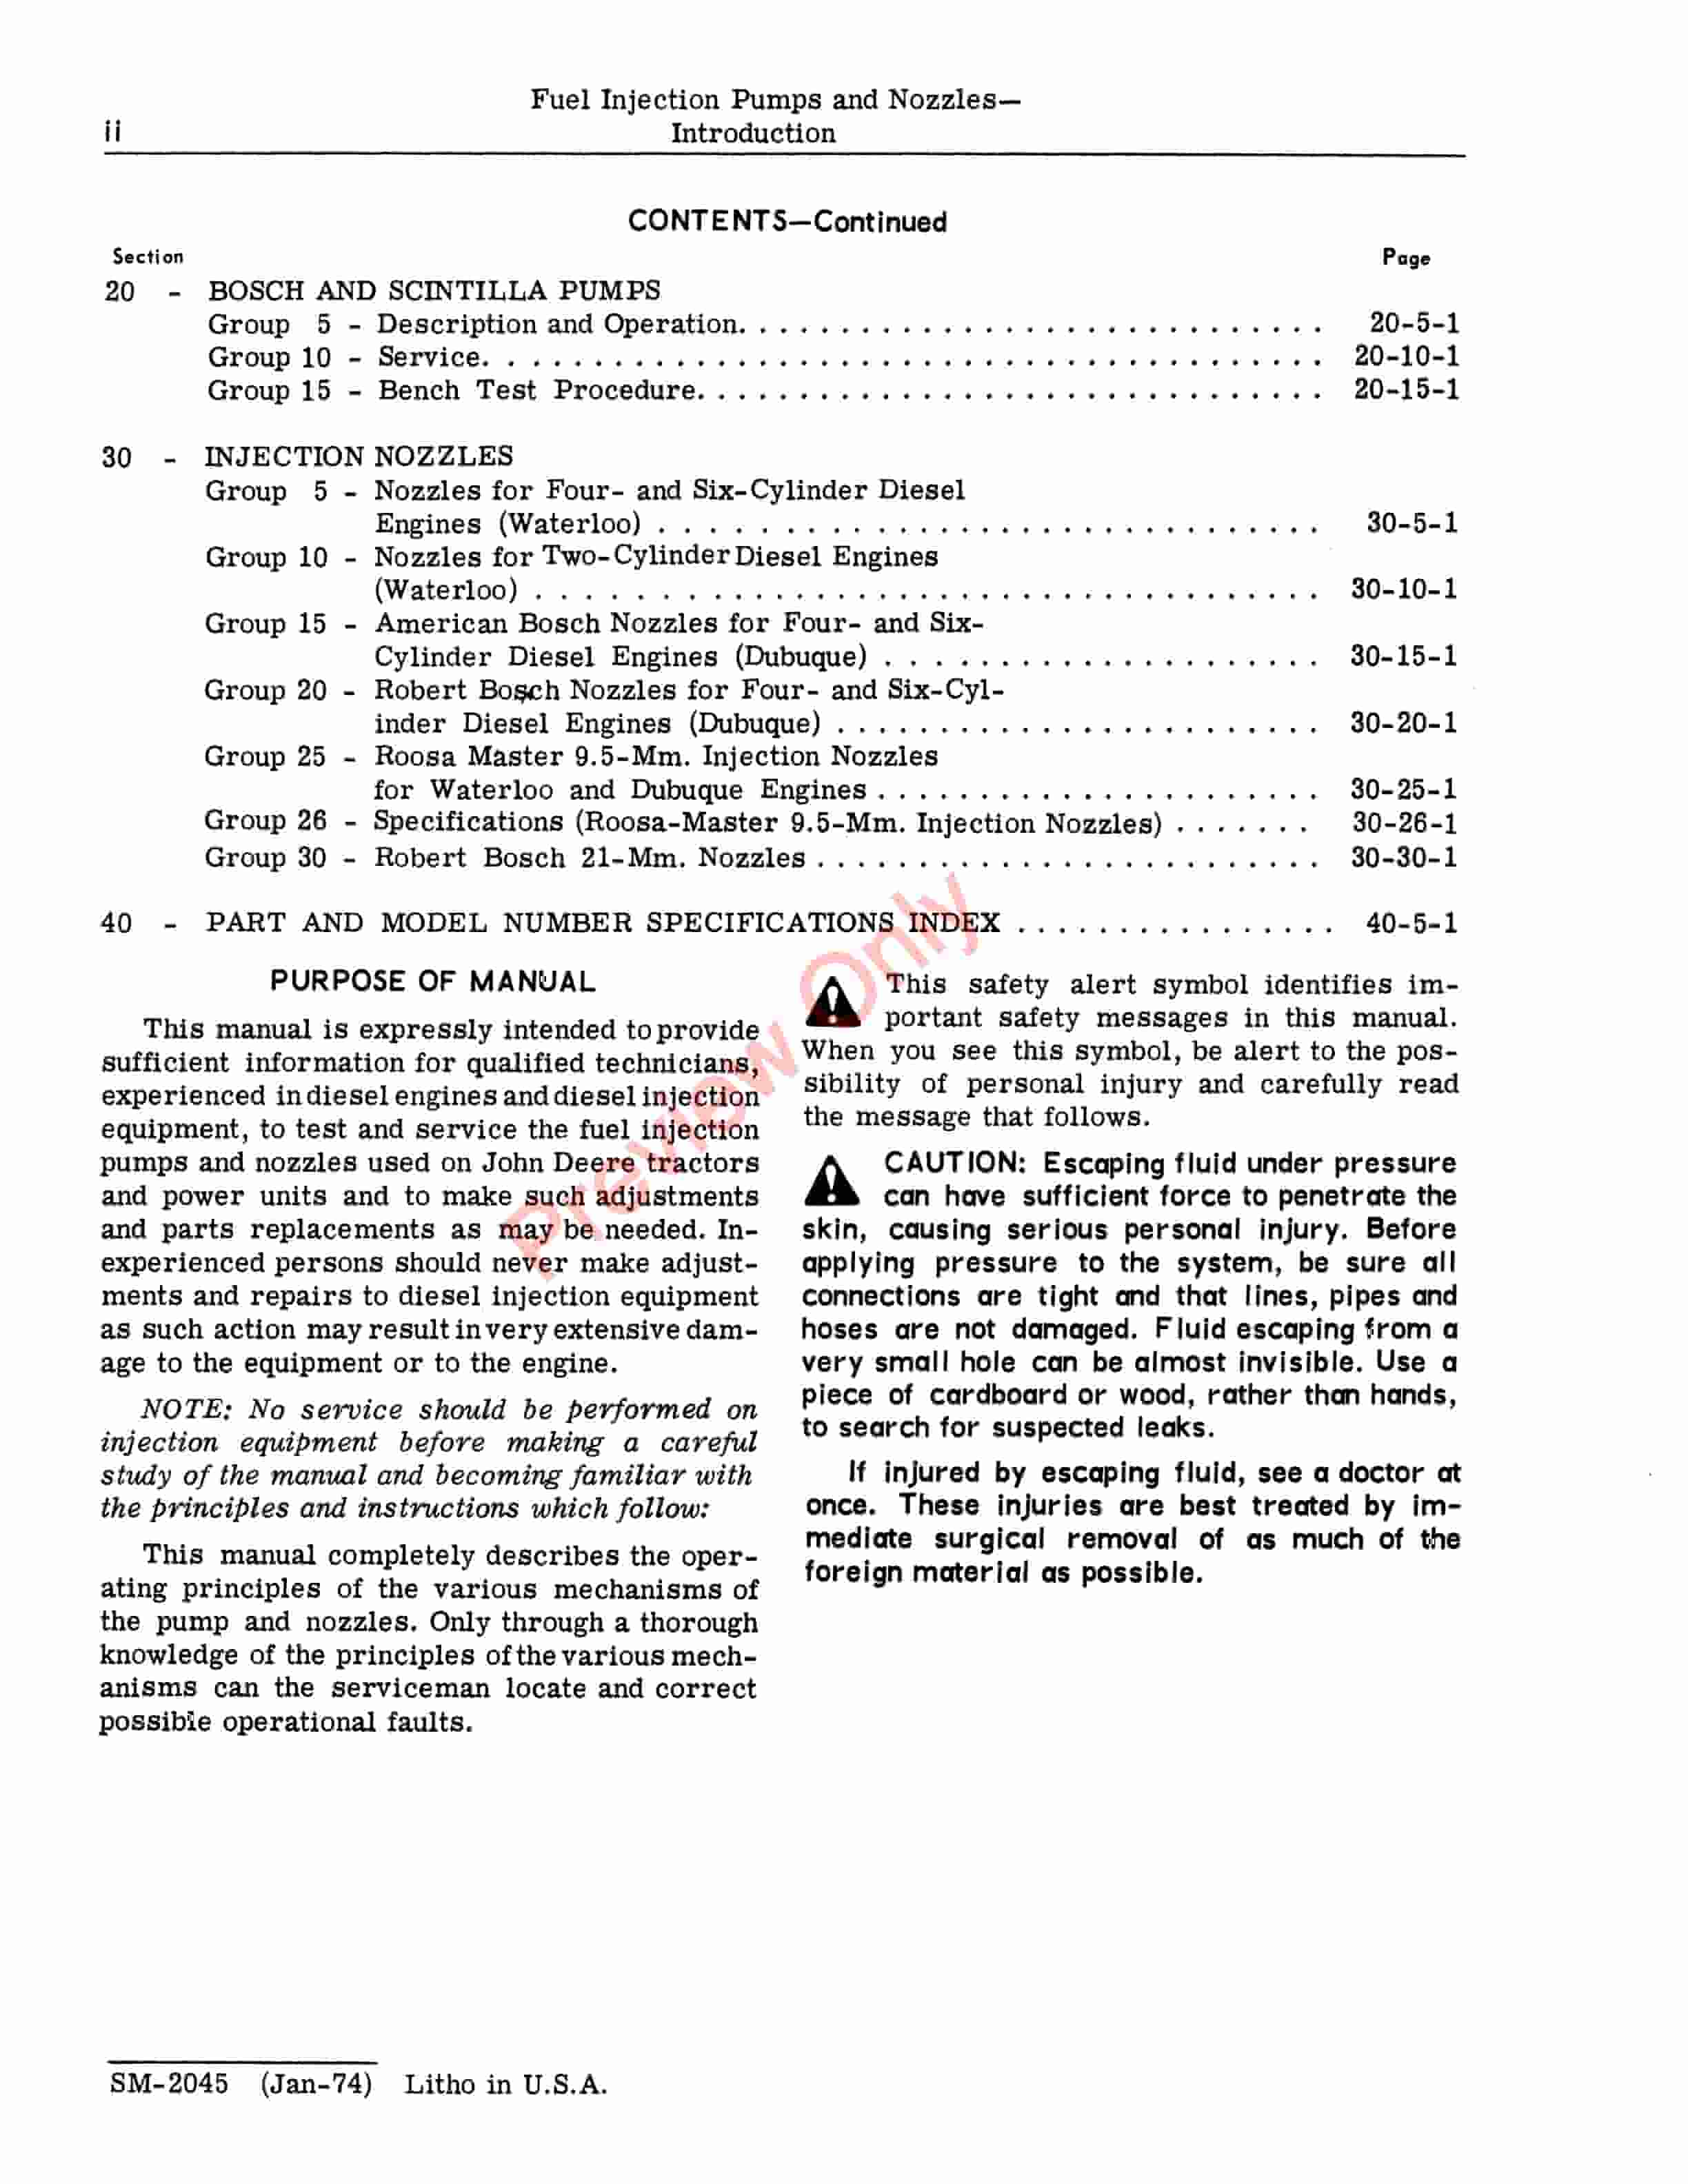 John Deere Testing And Servicing Fuel Injection Pumps And Nozzles Service Manual SM2045 01APR81 4